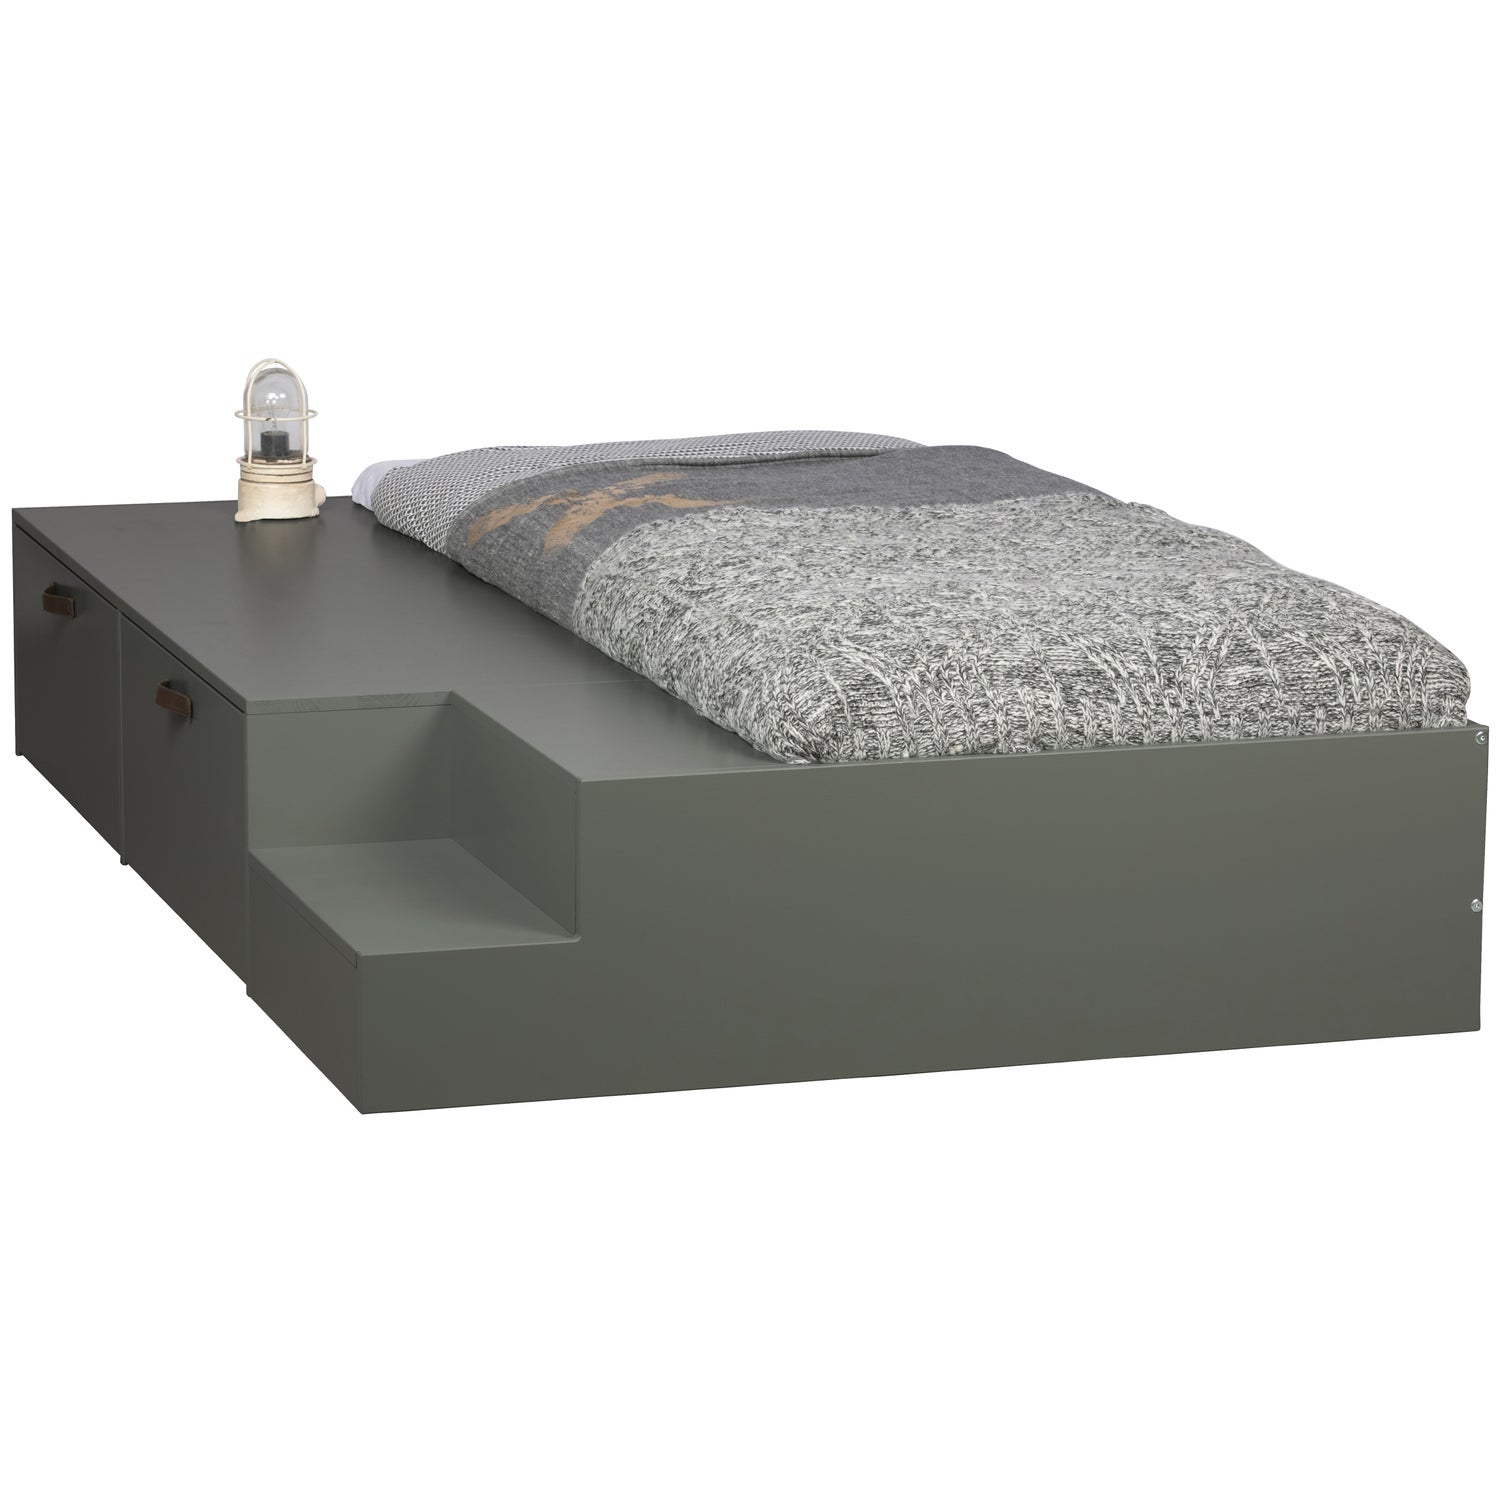 377037-S-03_VS_VT_Stage_bed___lades_grenen_soap_90x200cm.jpg?auto=webp&format=png&width=2000&height=2000